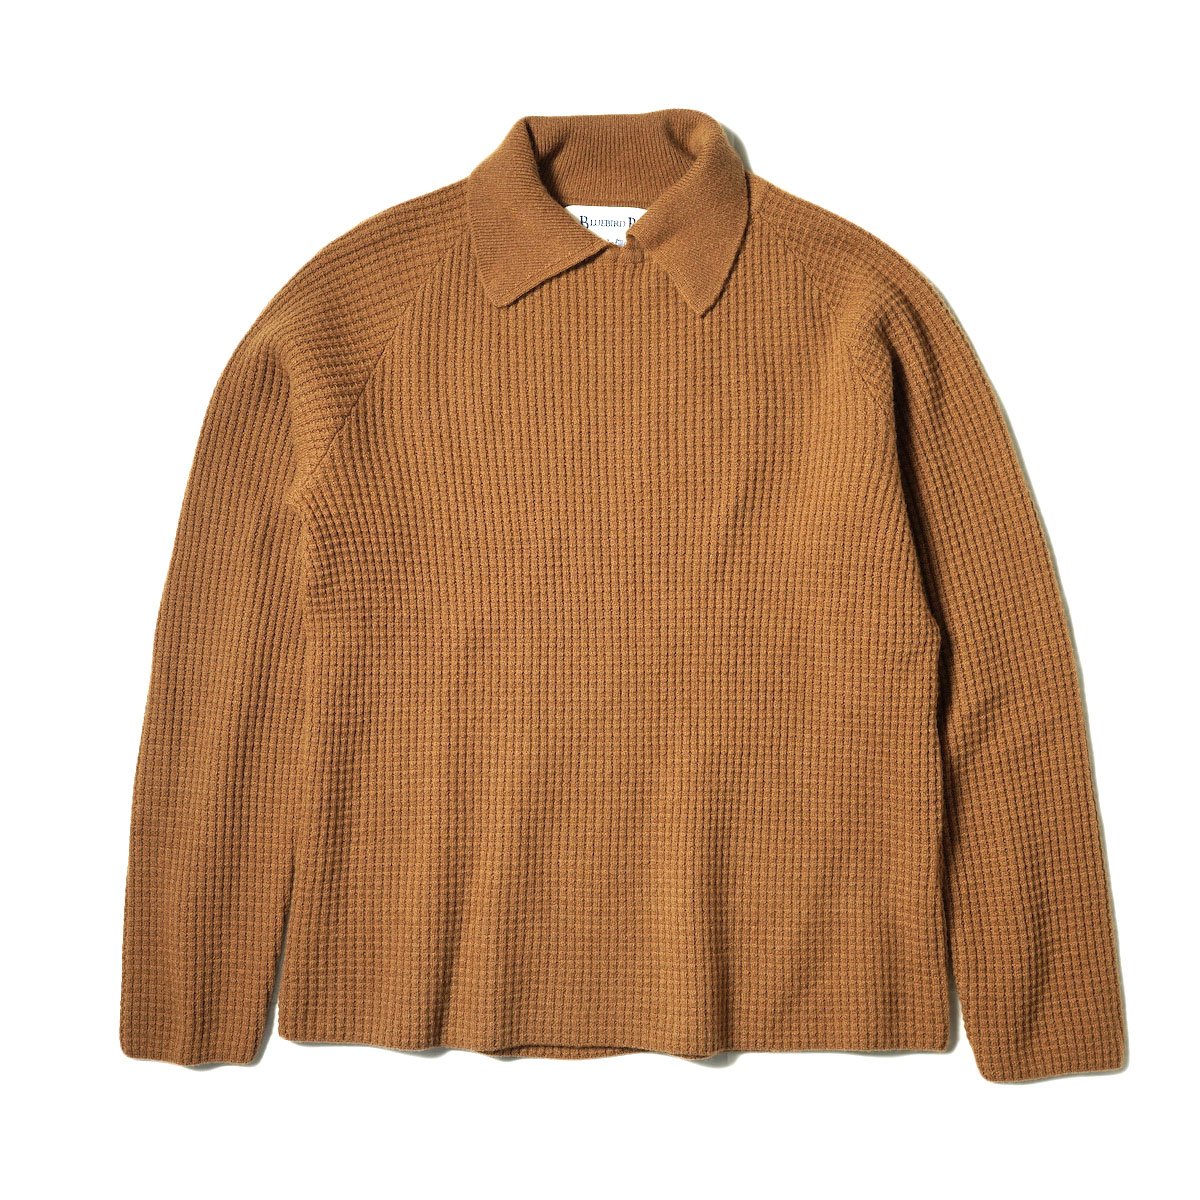 BLUEBIRD BOULEVARD / Fine Lambswool & Cashmere Polo Sweater (Camel) 正面